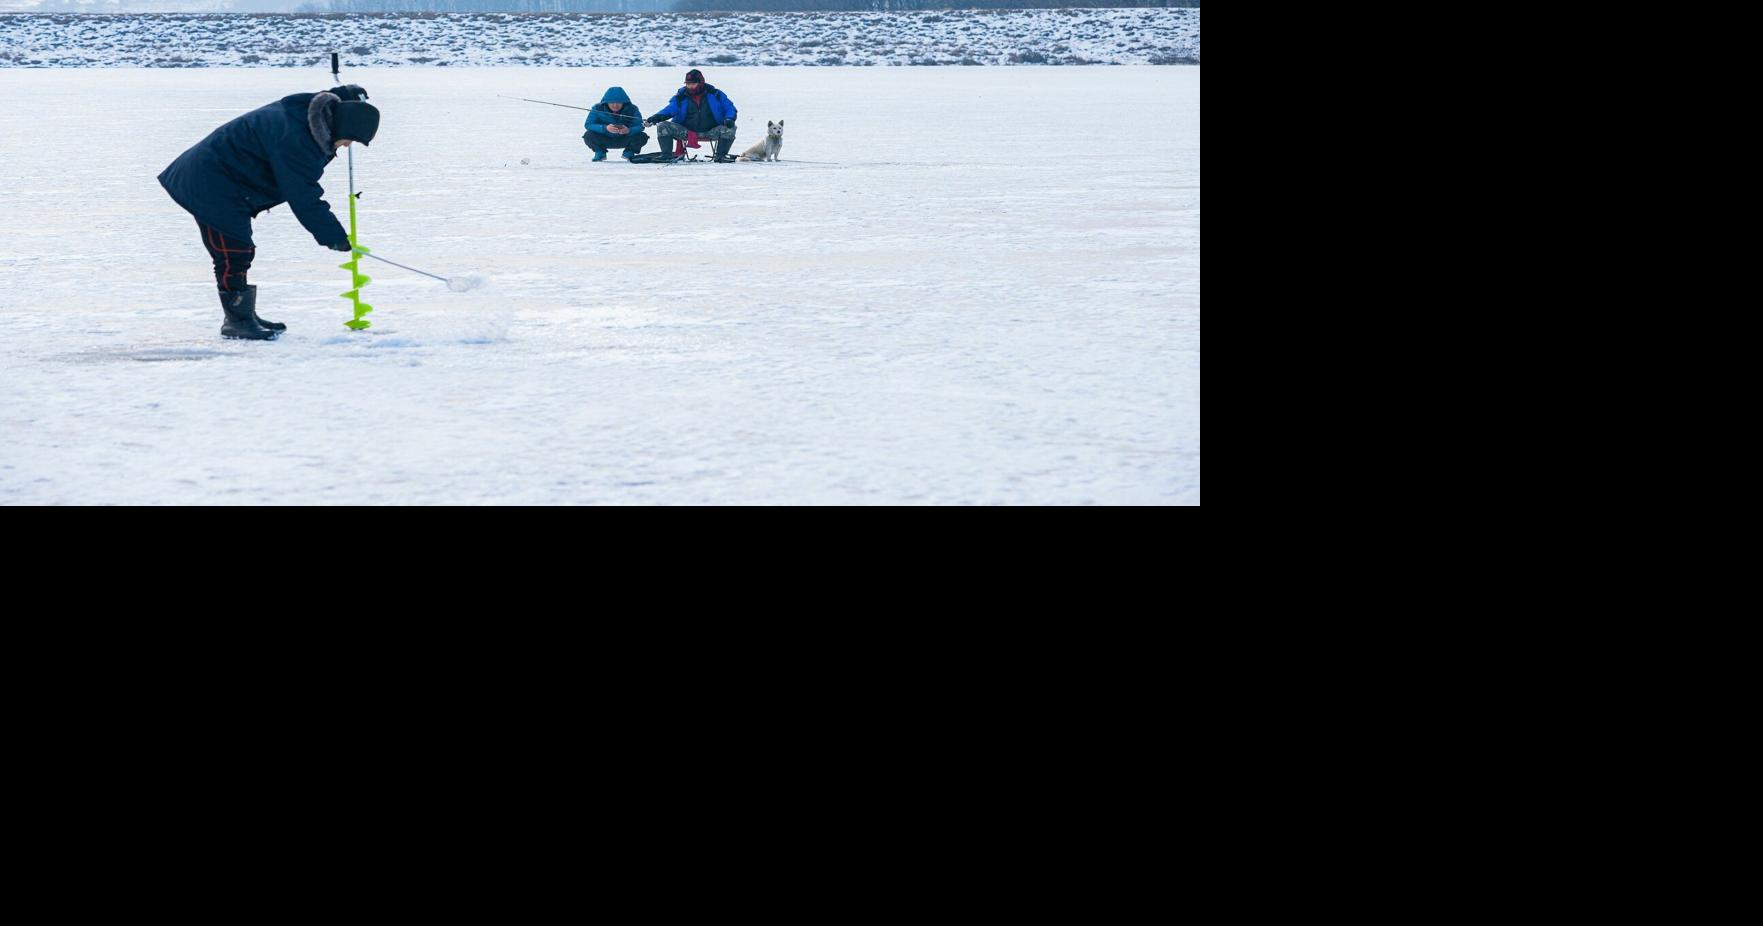 4th Annual Women's Ice Fishing Event - Enjoy Jefferson County